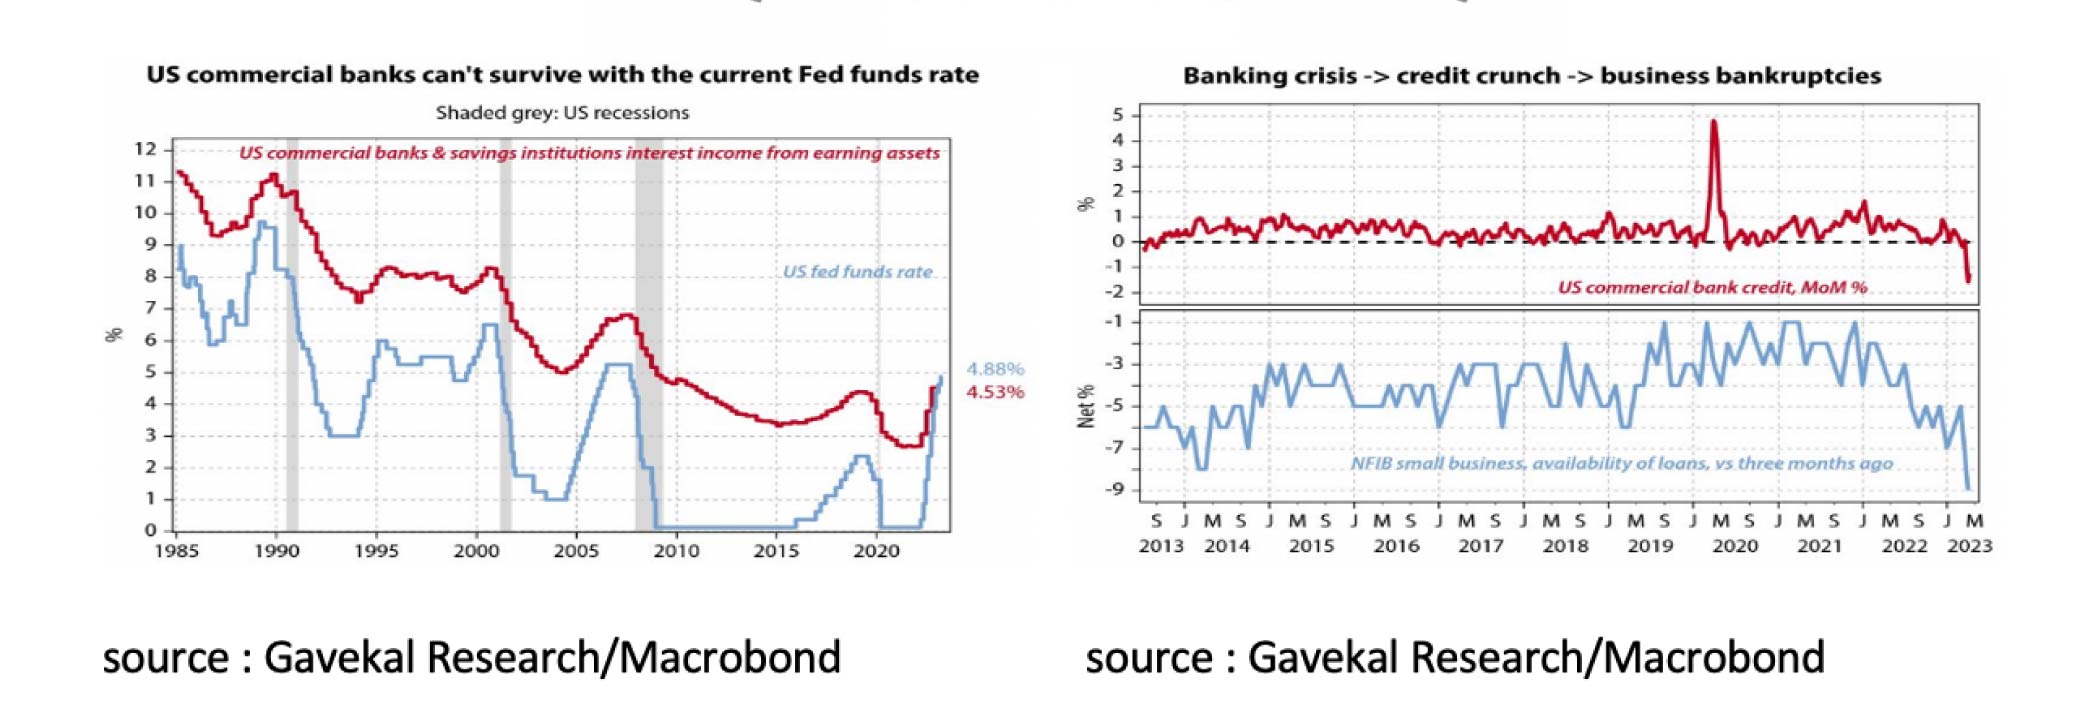 US commercial banks can't survive with the current Fed funds rate